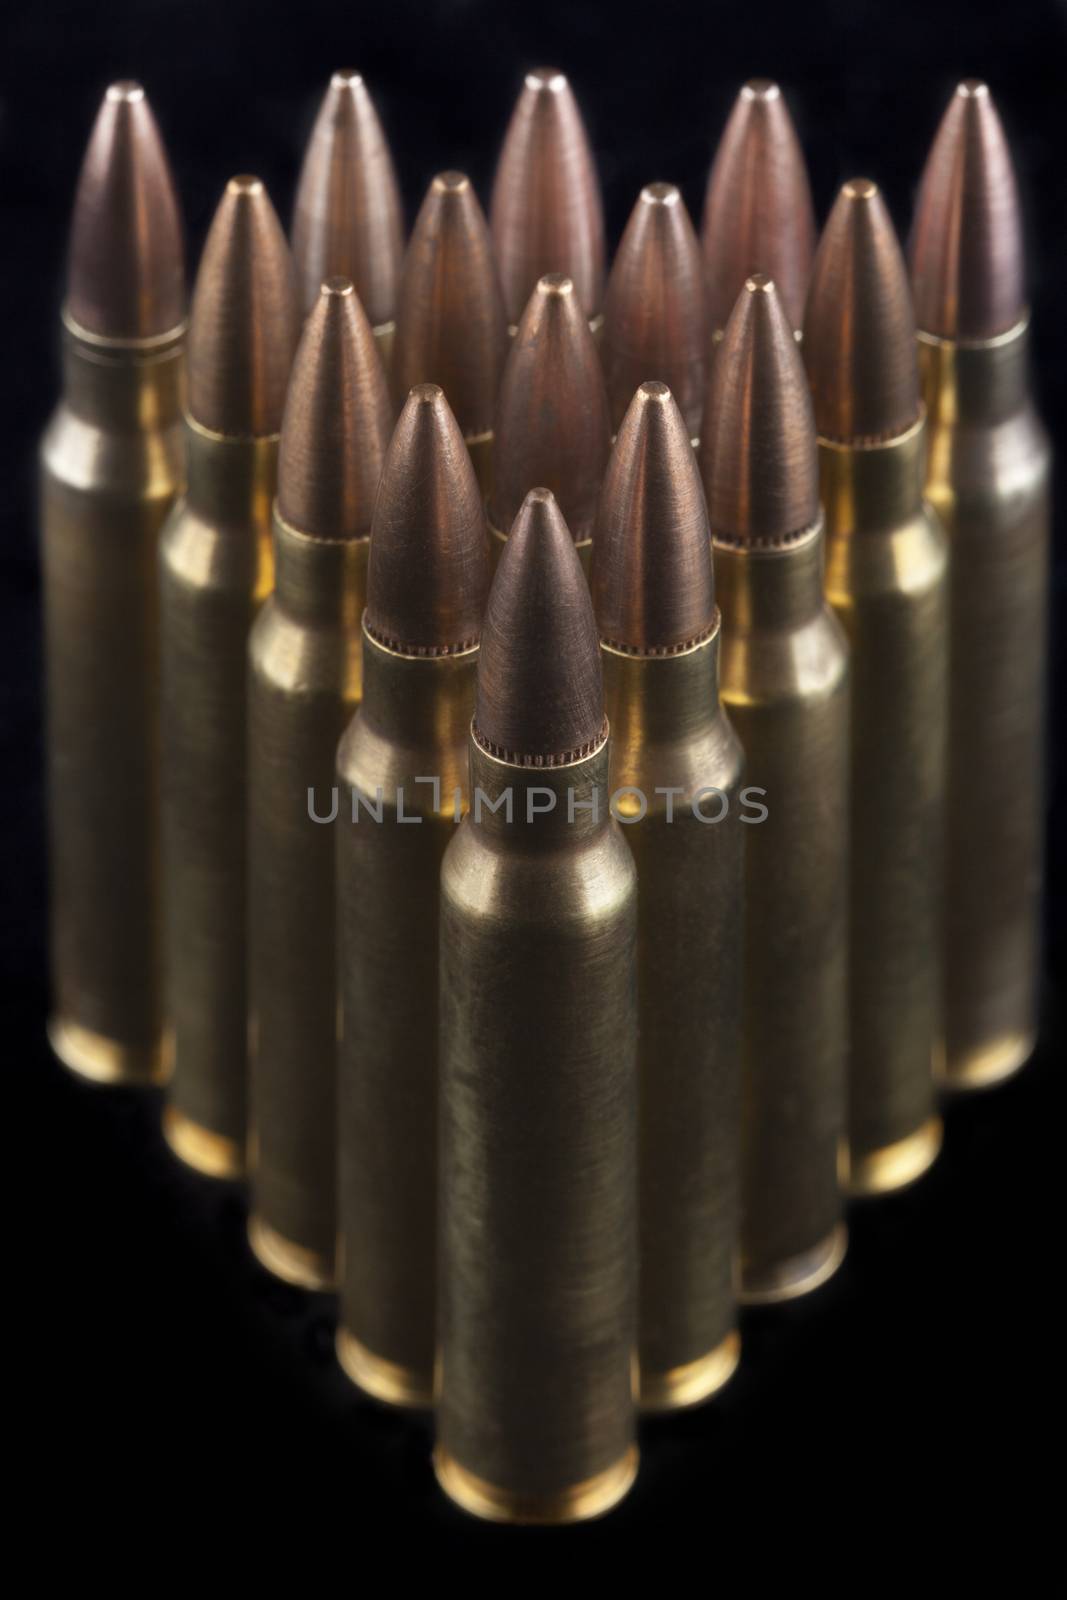 Ammo Close-up by orcearo